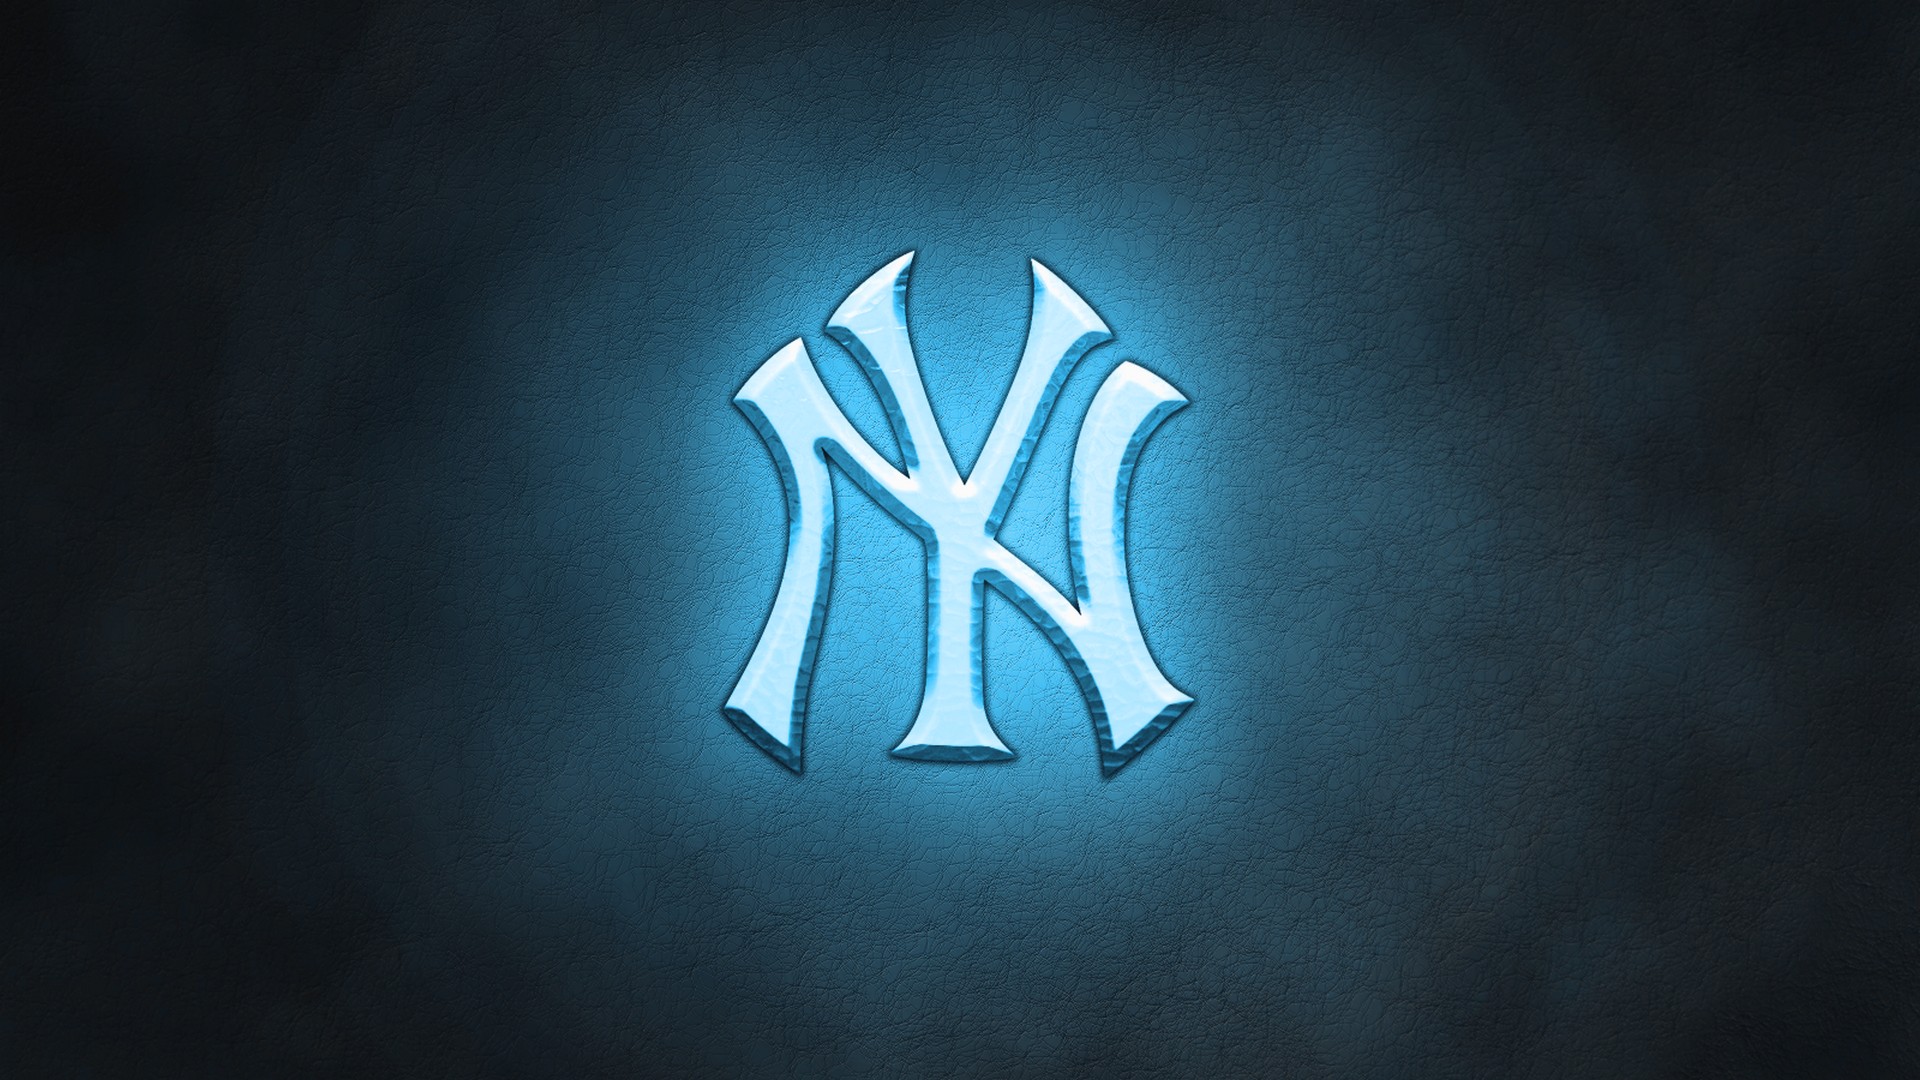 New York Yankees Wallpaper For Mac with high-resolution 1920x1080 pixel. You can use this wallpaper for Mac Desktop Wallpaper, Laptop Screensavers, Android Wallpapers, Tablet or iPhone Home Screen and another mobile phone device